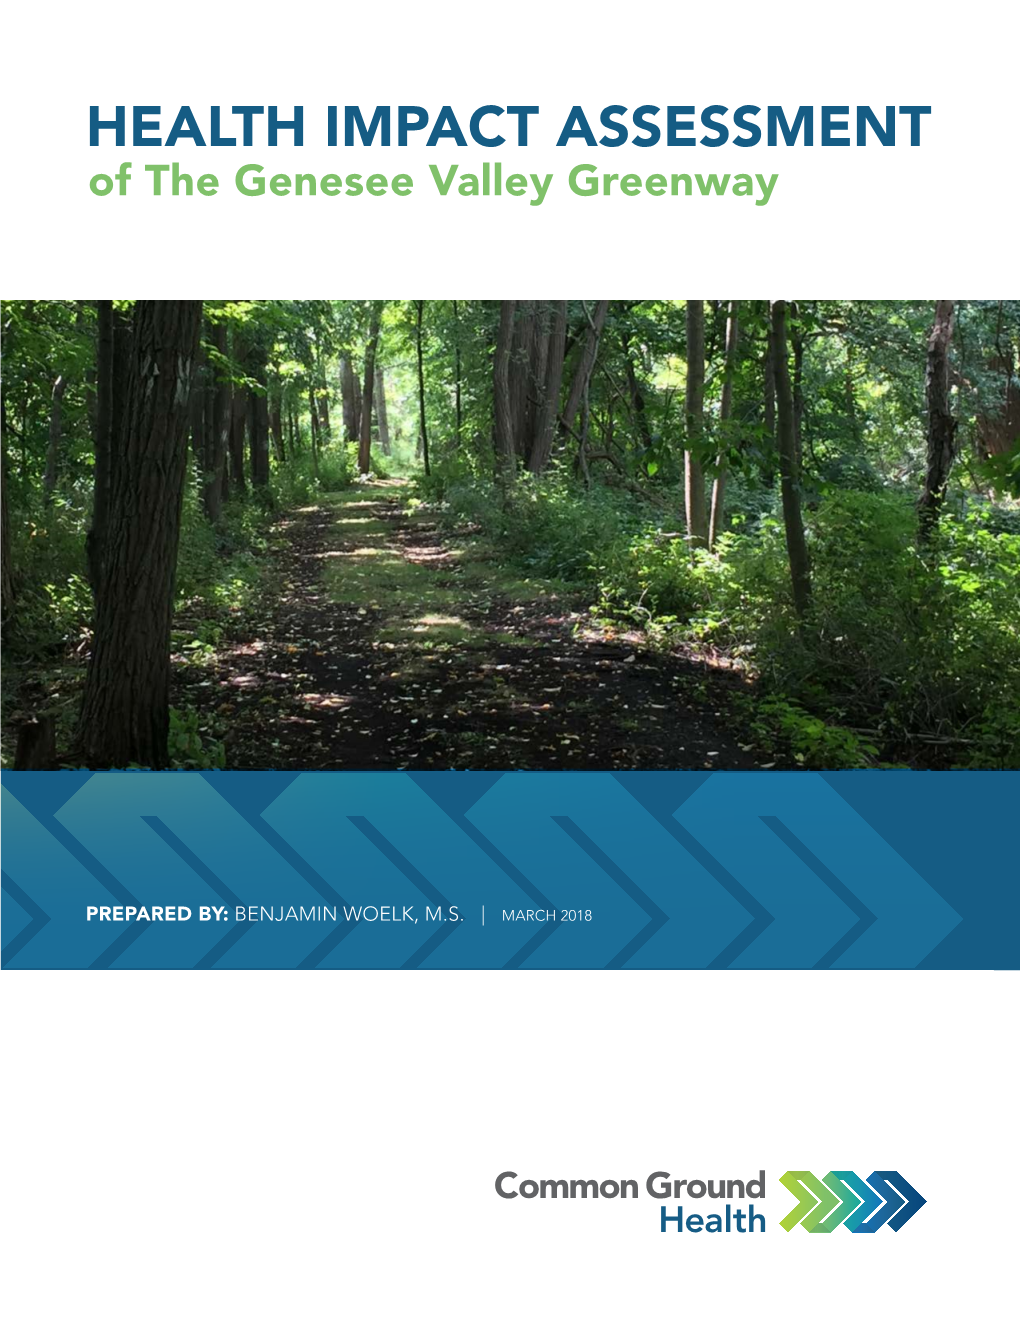 HEALTH IMPACT ASSESSMENT of the Genesee Valley Greenway